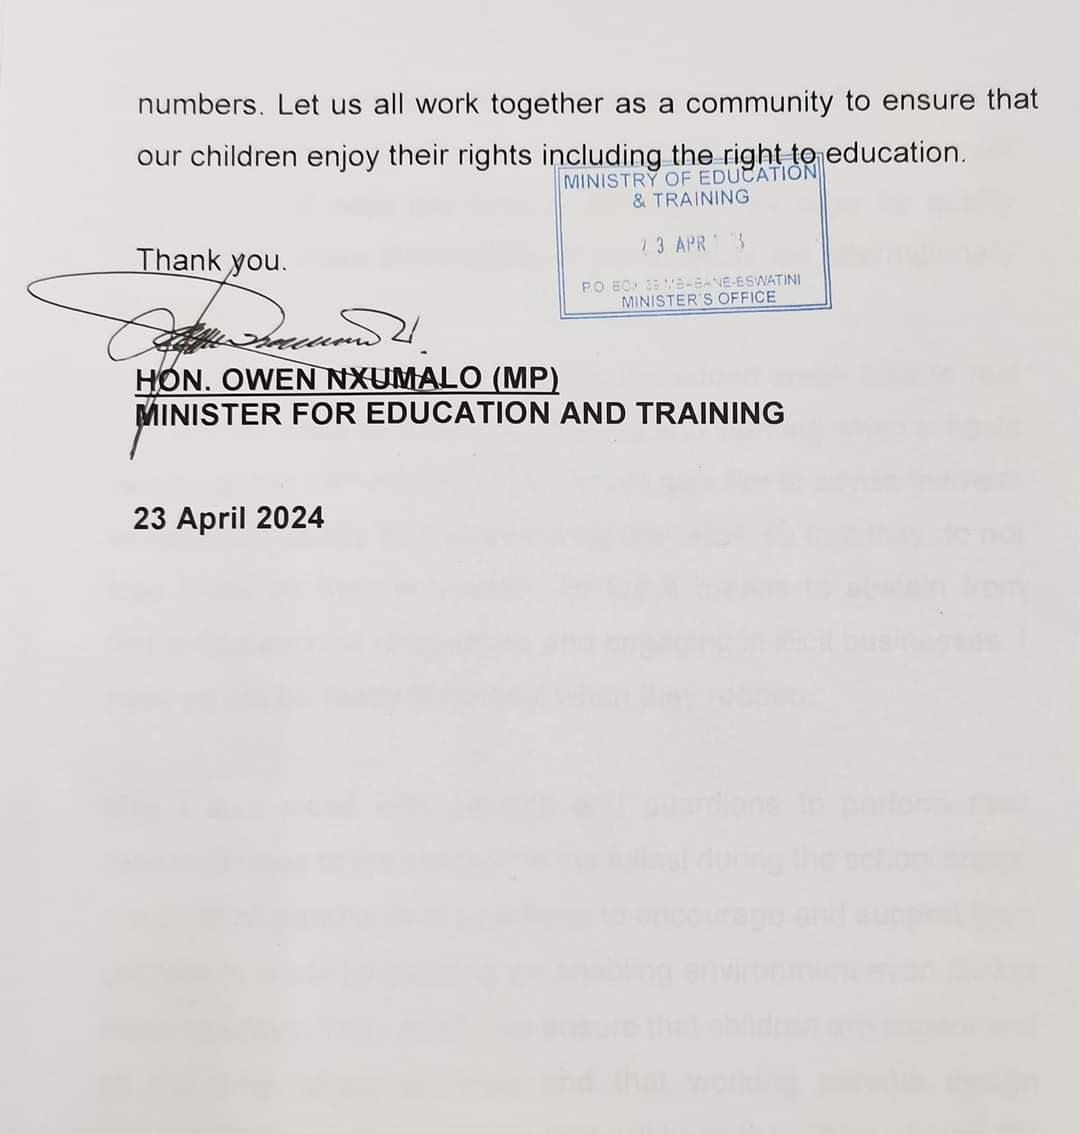 The reopening of schools has been postponed to 14 May 2024. The SNAT NEC did take part in this decision as taken yesterday (23-04-2024) at the Ministry of Education and Training (MoET).